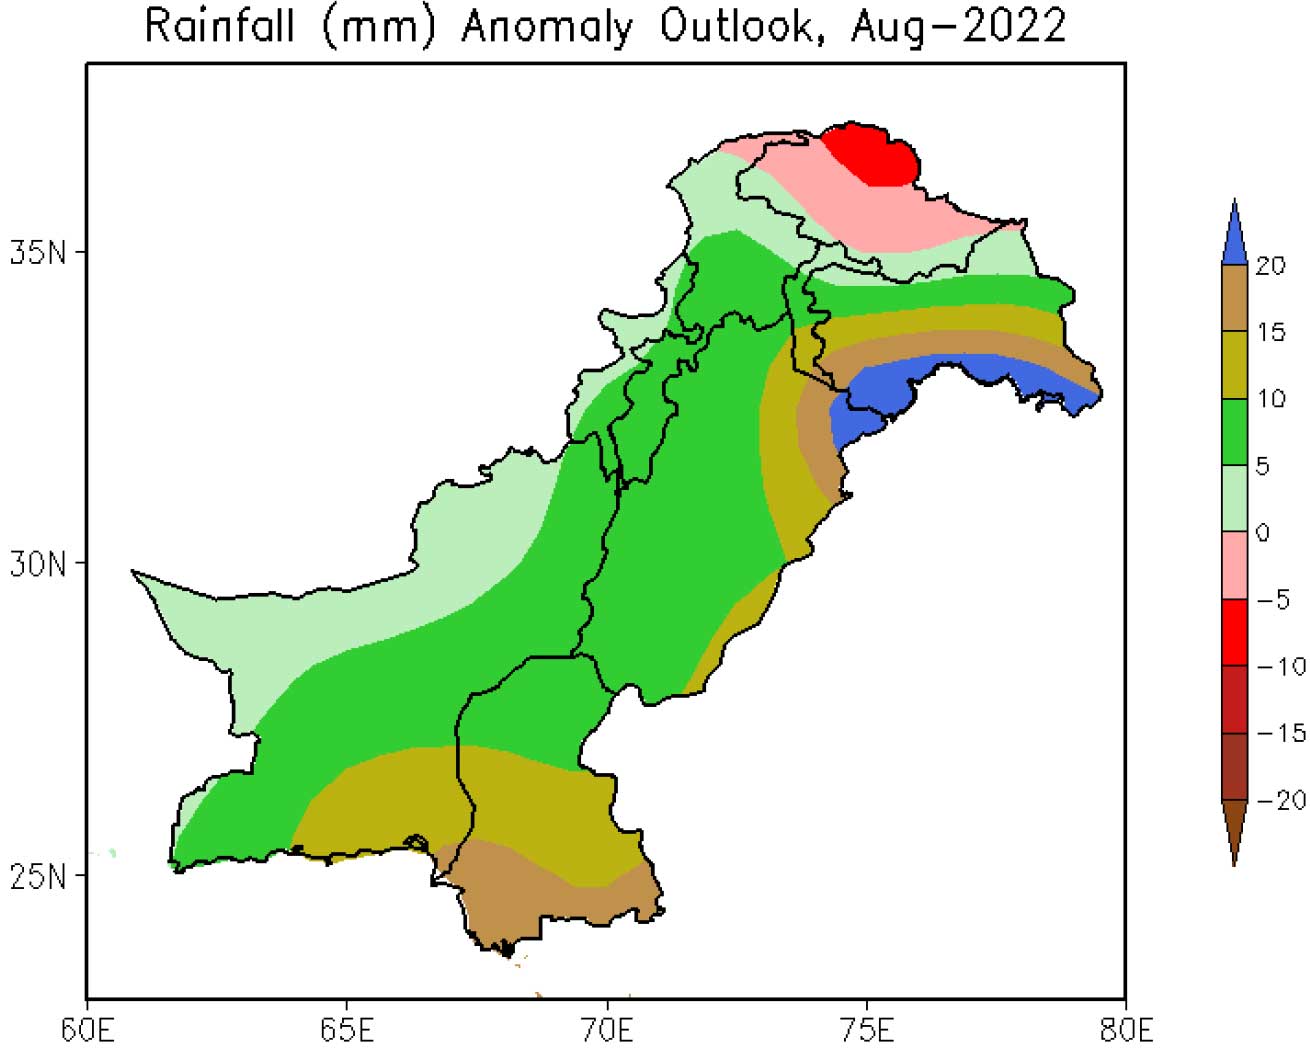 PMD issues outlook for August 2022.